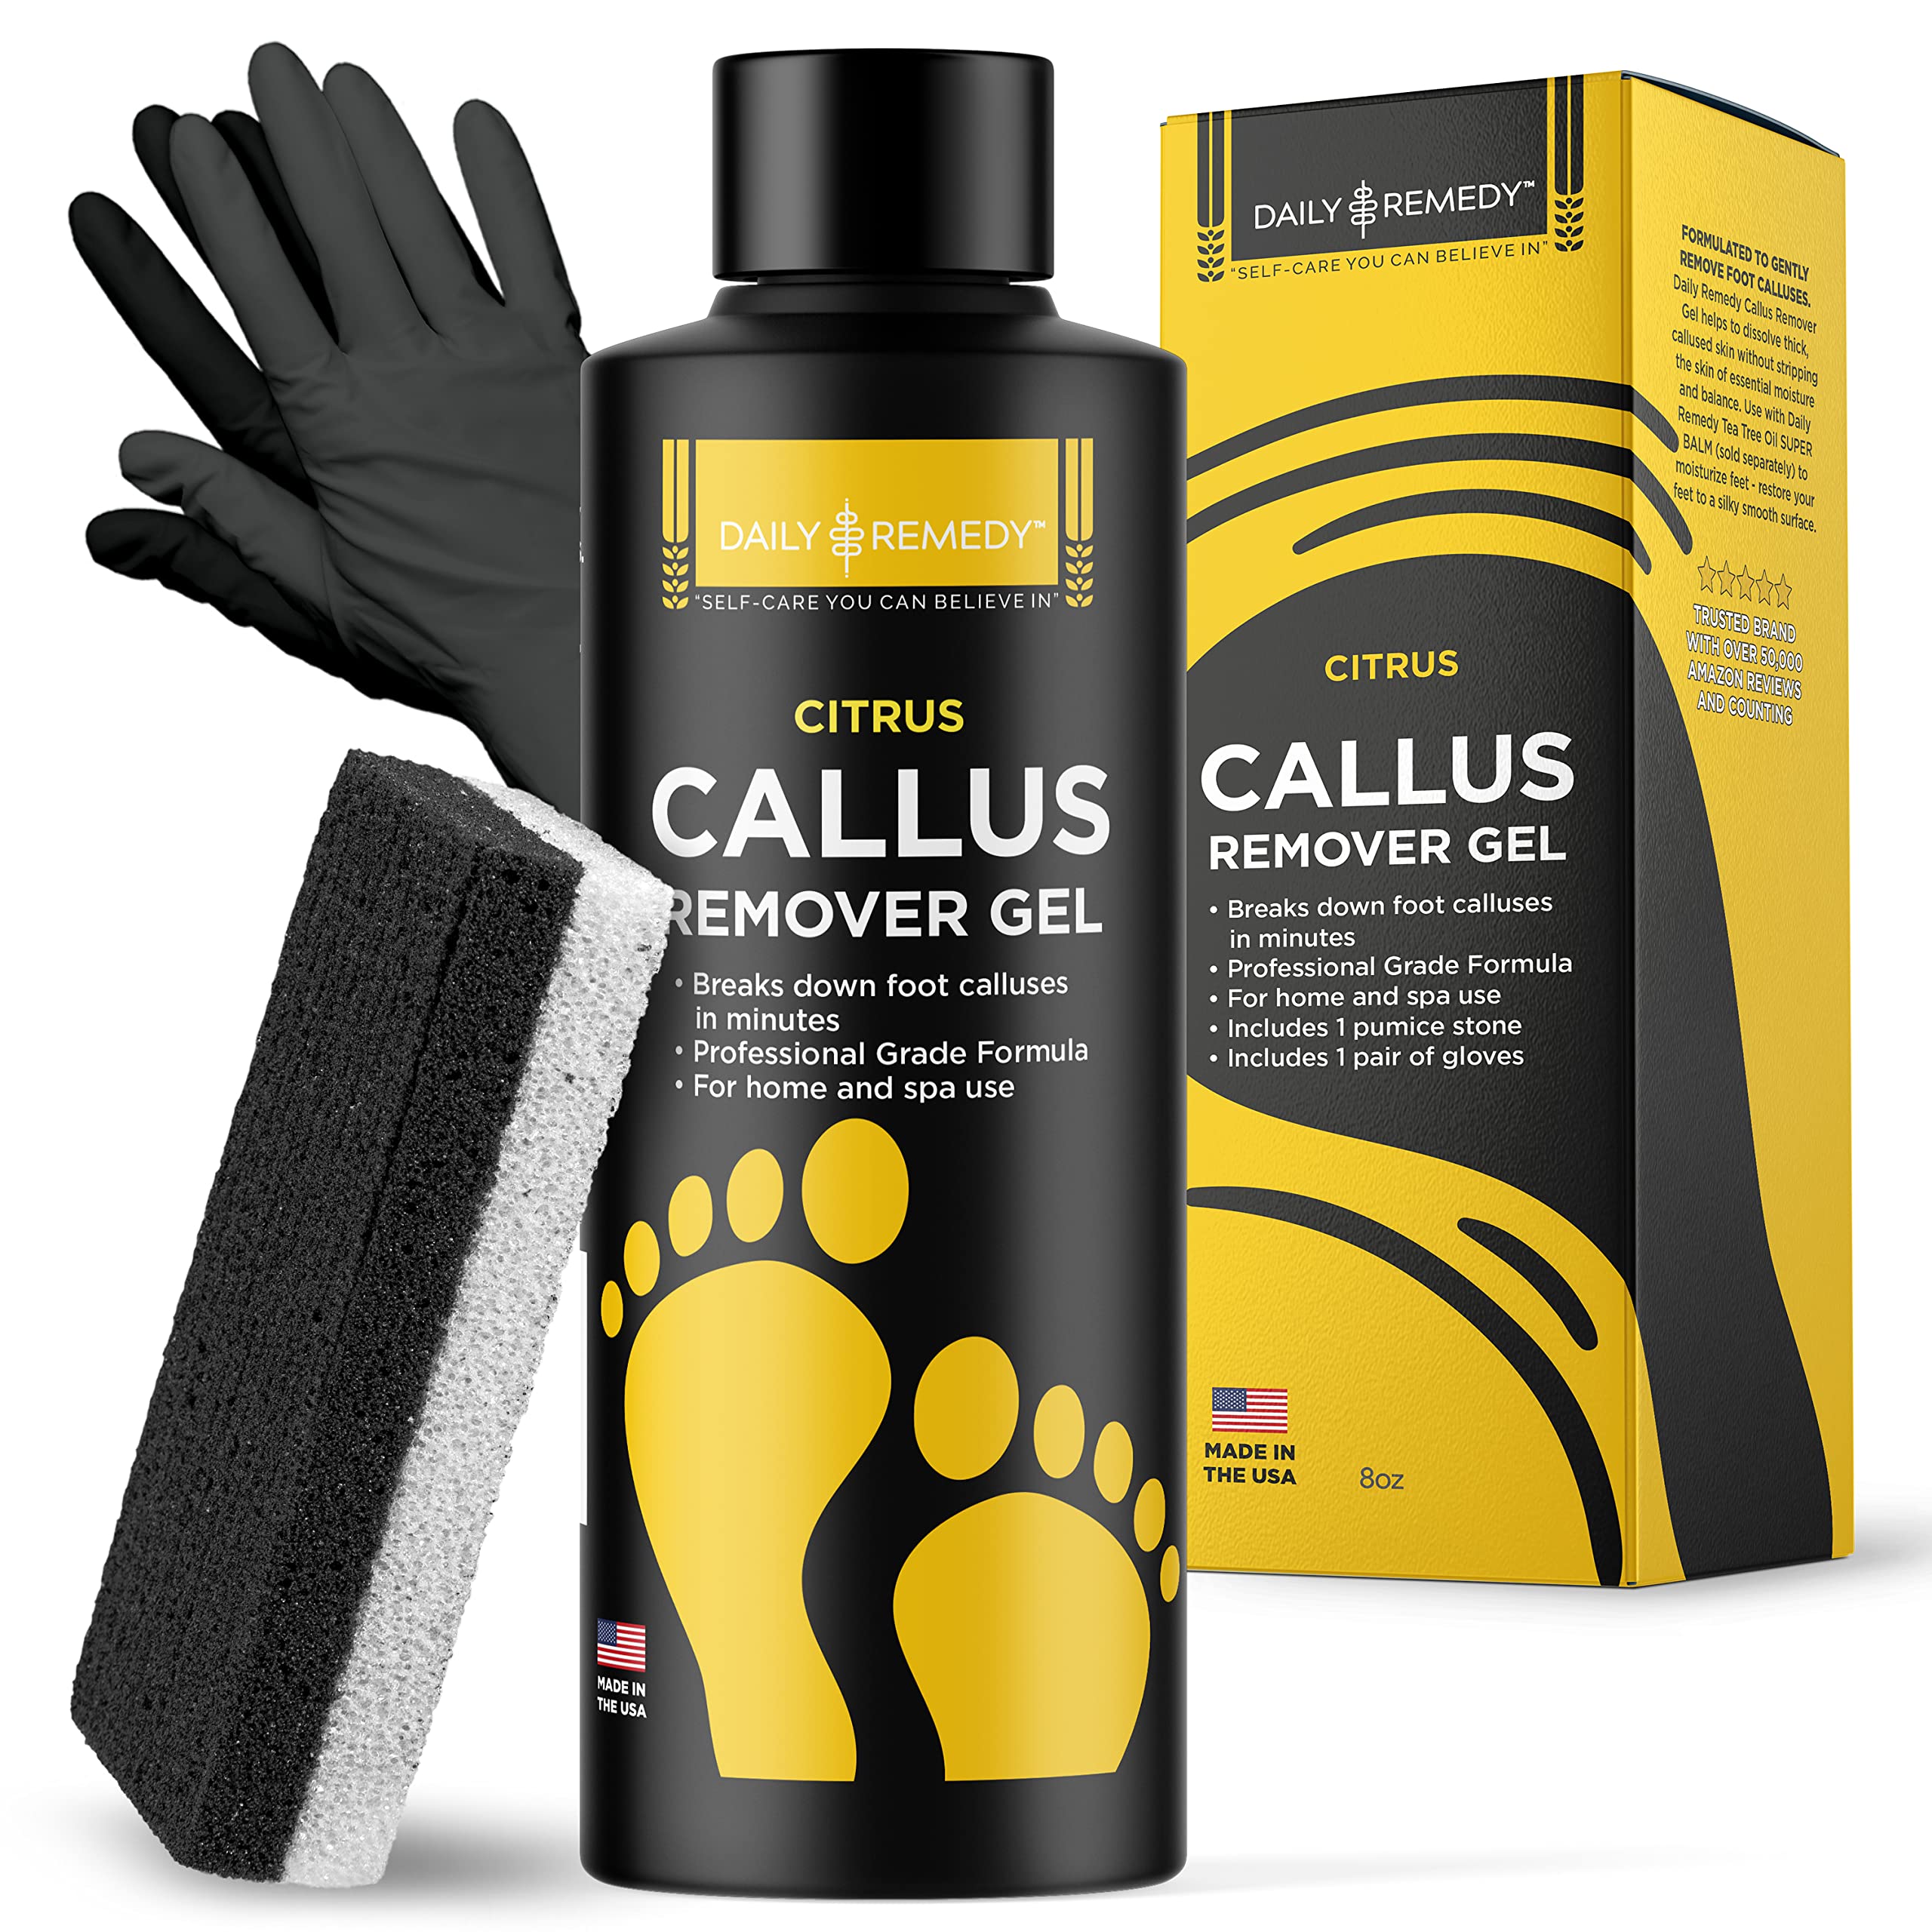 Extra Strength Callus Remover Gel & Foot Pumice Stone Set - For